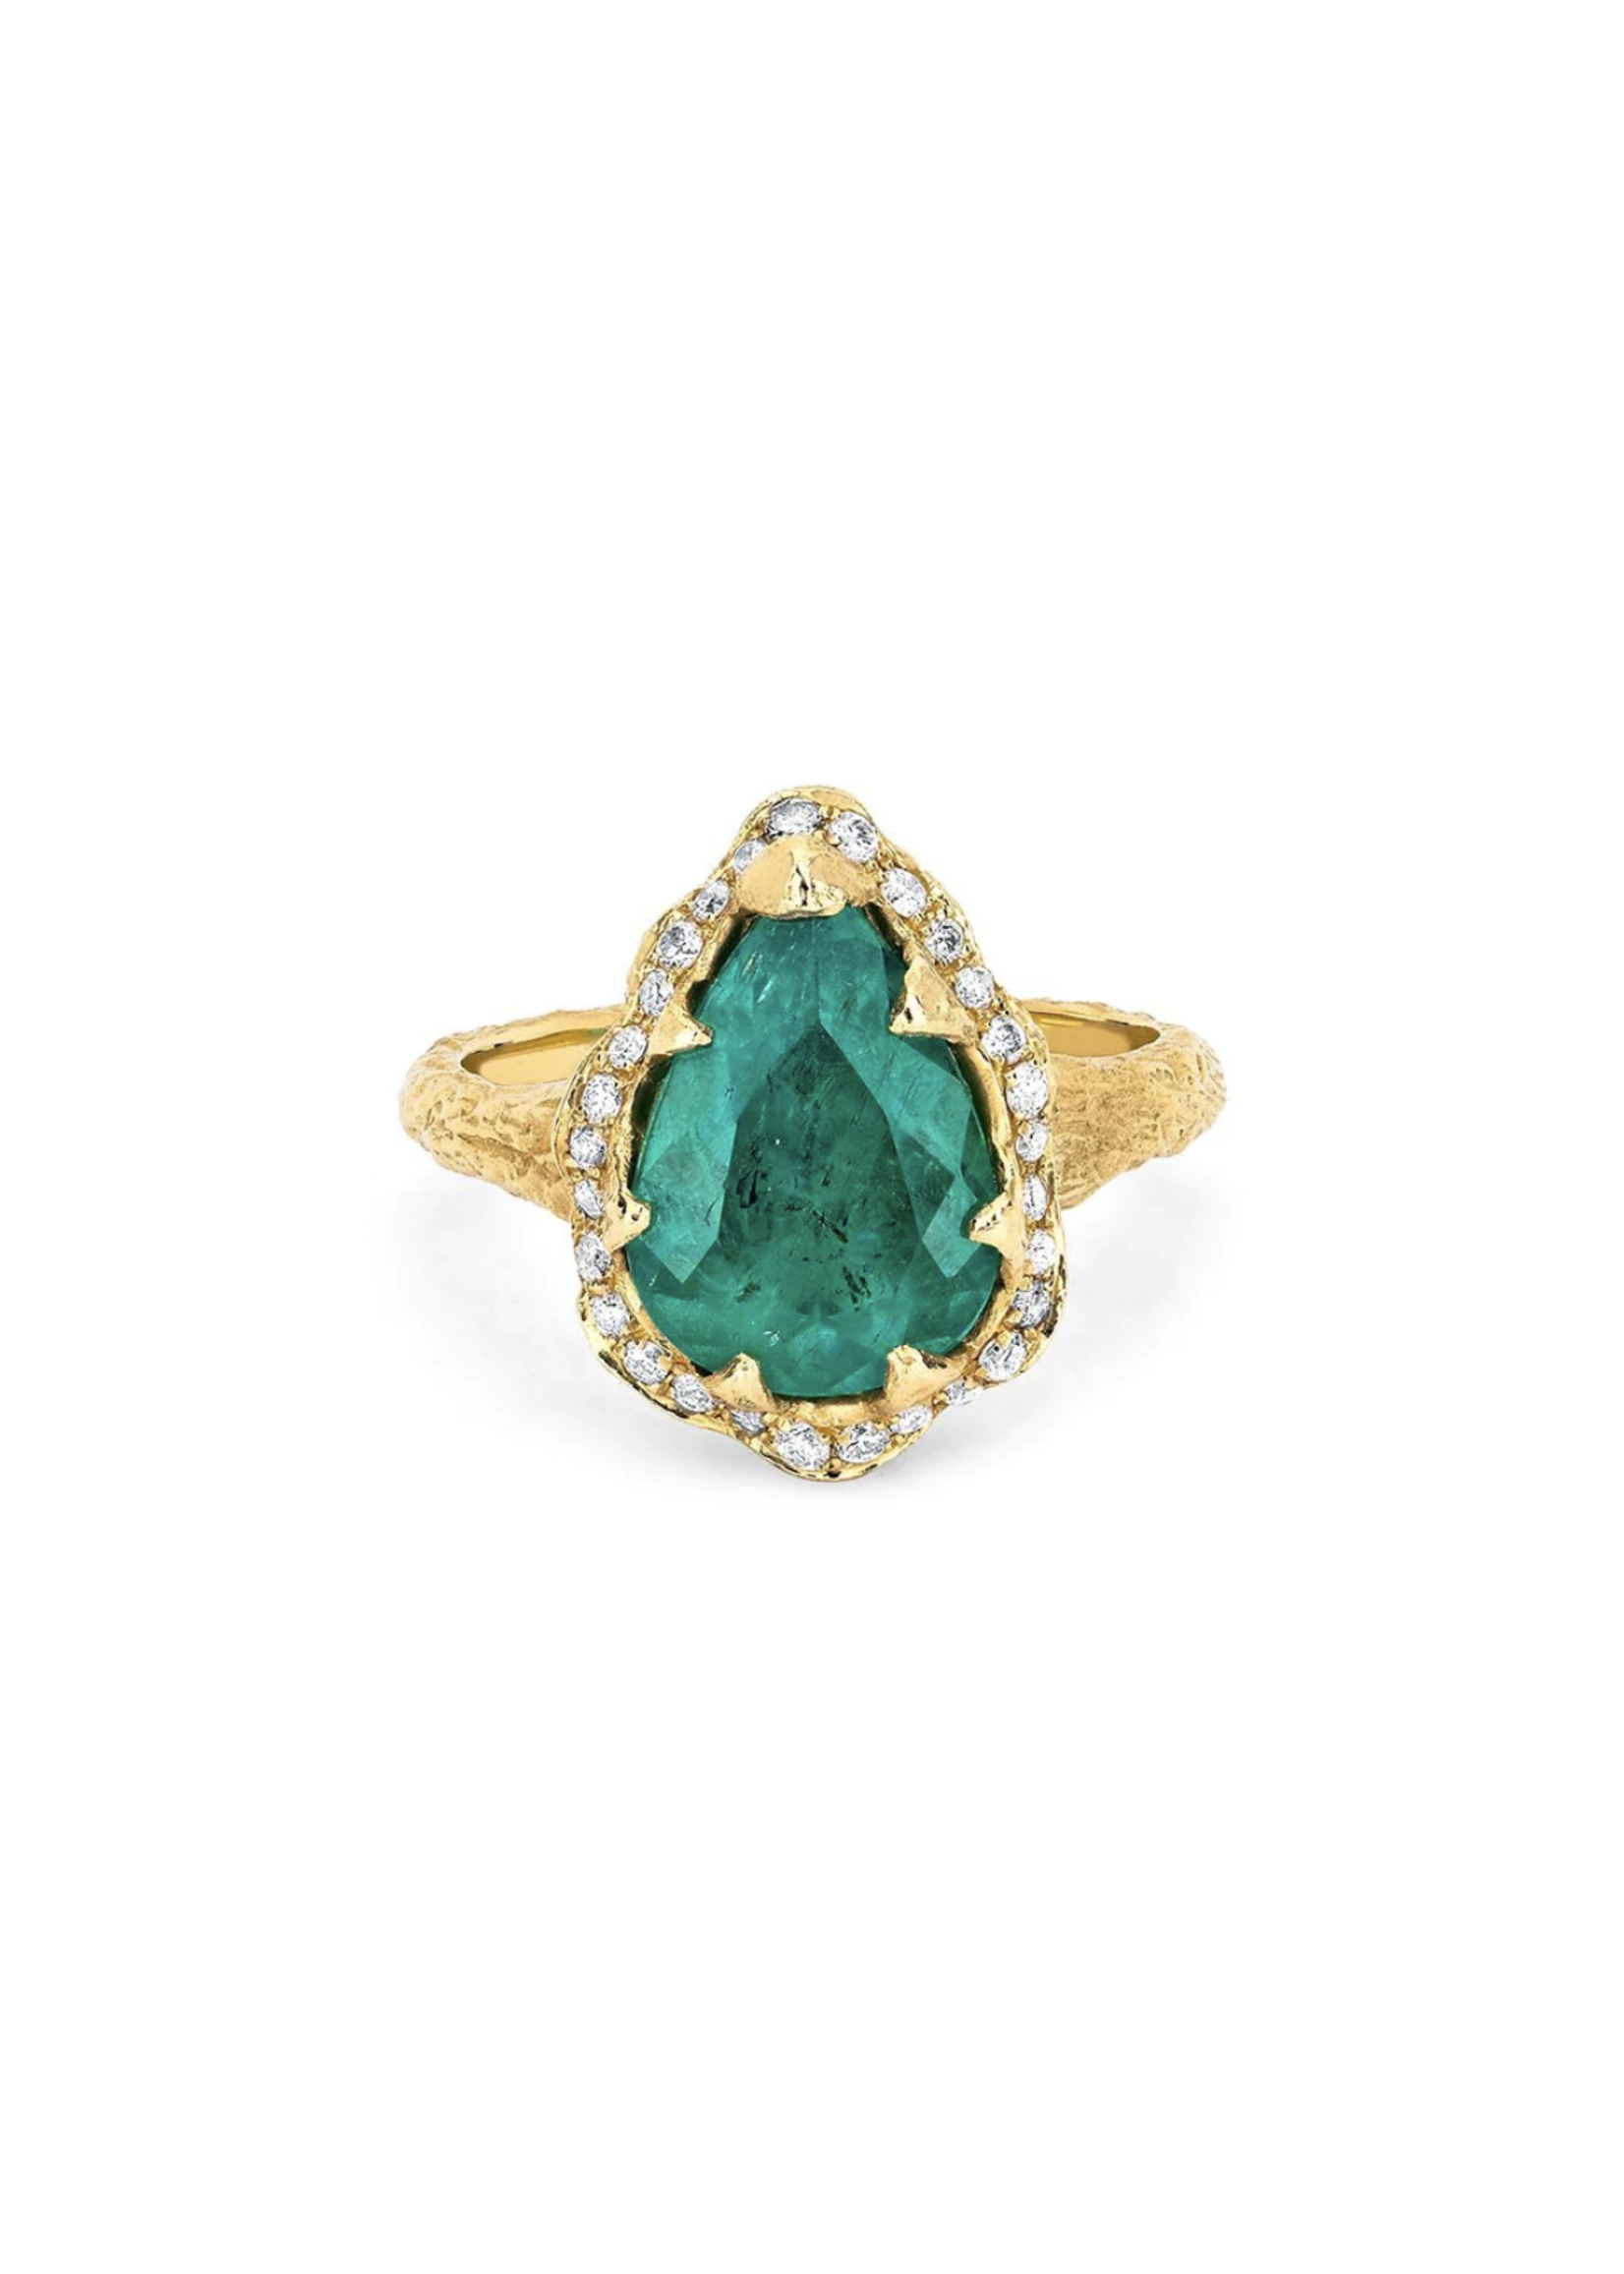 Logan Hollowell Water Drop Emerald Queen Ring with Diamond Halo